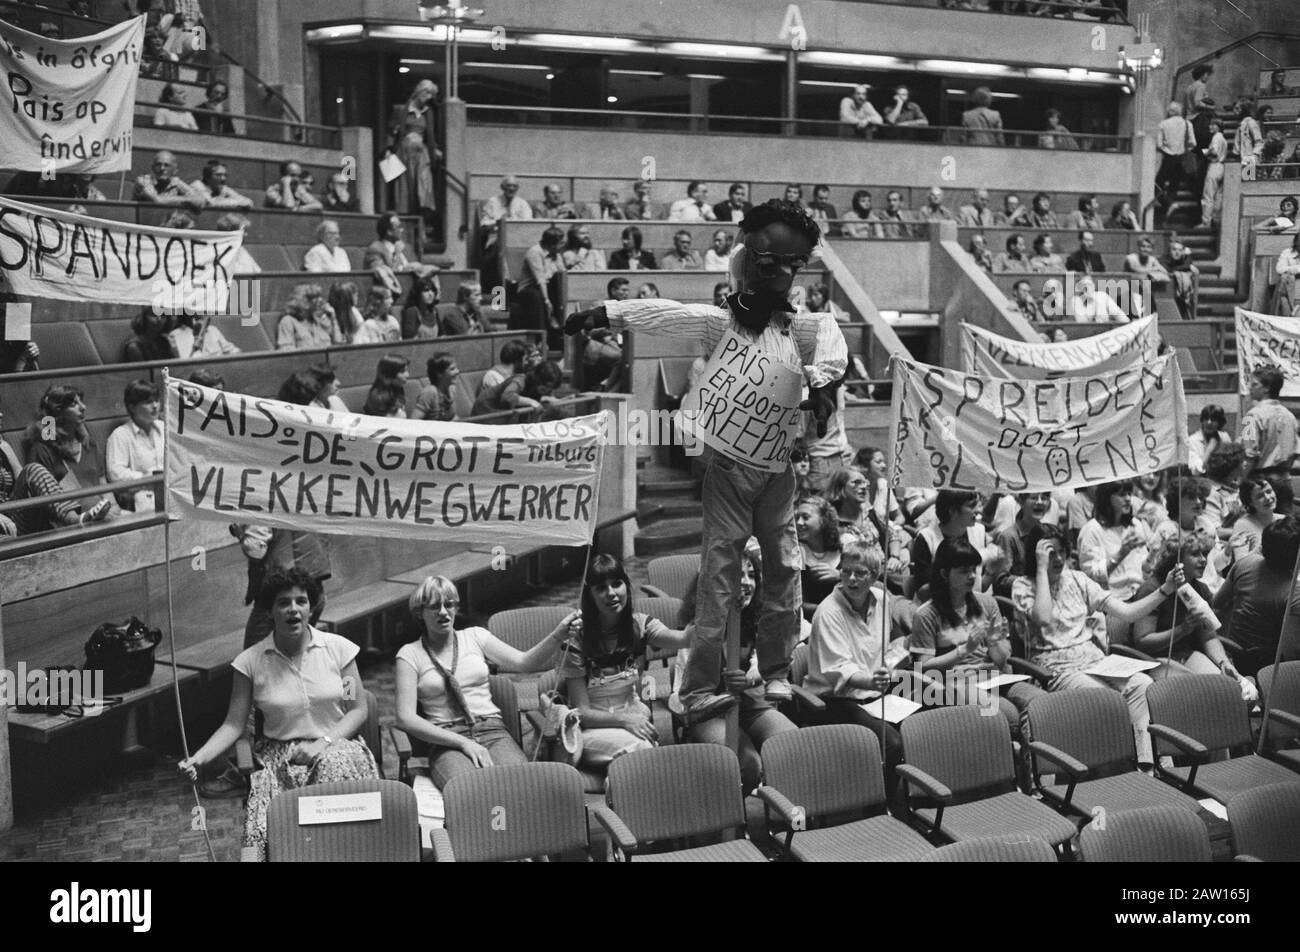 Demonstrative meeting of teachers and students of teacher training colleges and training schools for Kindergarten teachers against the minister's policy Pais (R & W) in the Music Center in Utrecht  On the banners including Spread causes suffering and Pais major leaks roadmender Date: september 7, 1979 Location: Utrecht (prov), Utrecht (city) Keywords: demonstrations, teachers, banners, students Stock Photo